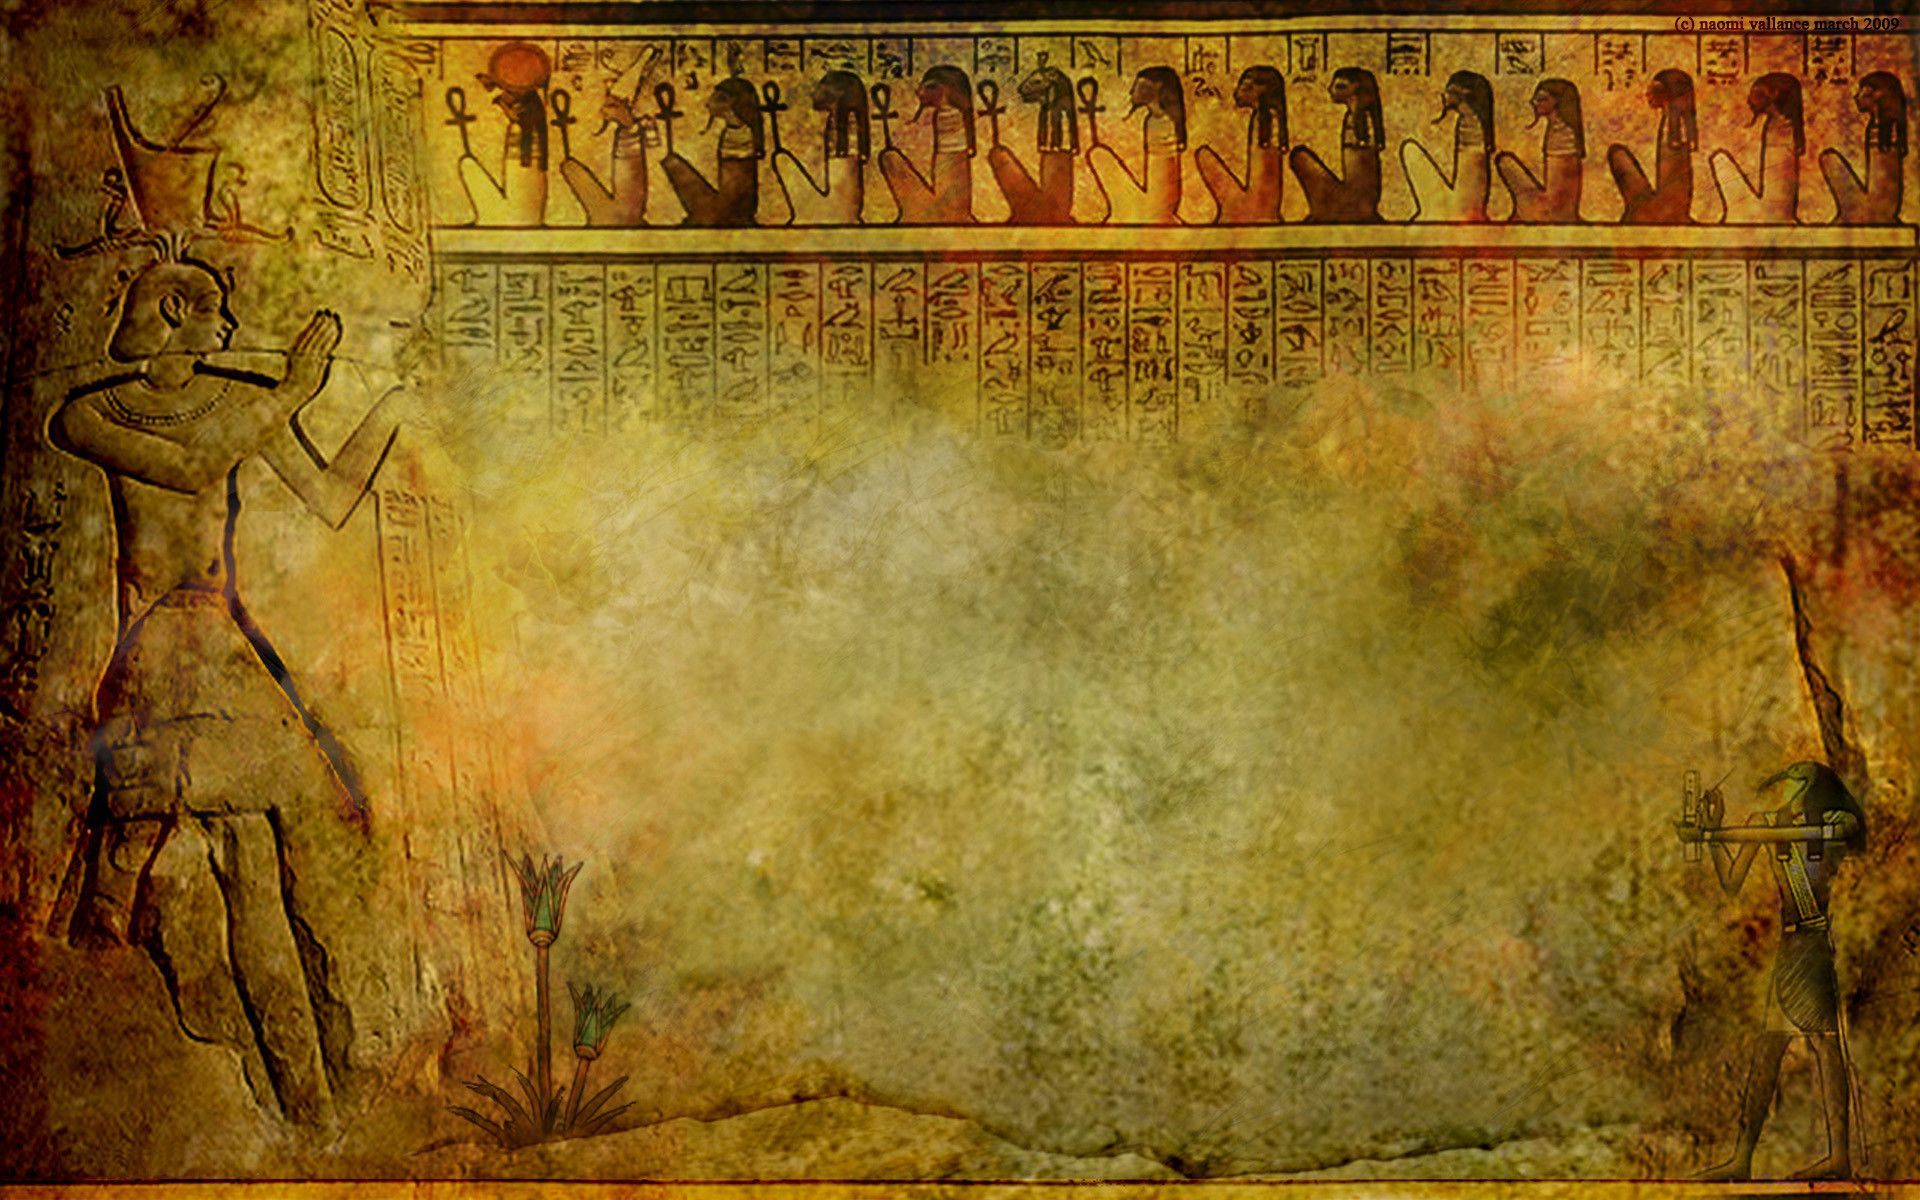 Ancient Egypt Picture Wallpaper Download, HQ Background. HD. Egypt wallpaper, Ancient egypt picture, Egypt